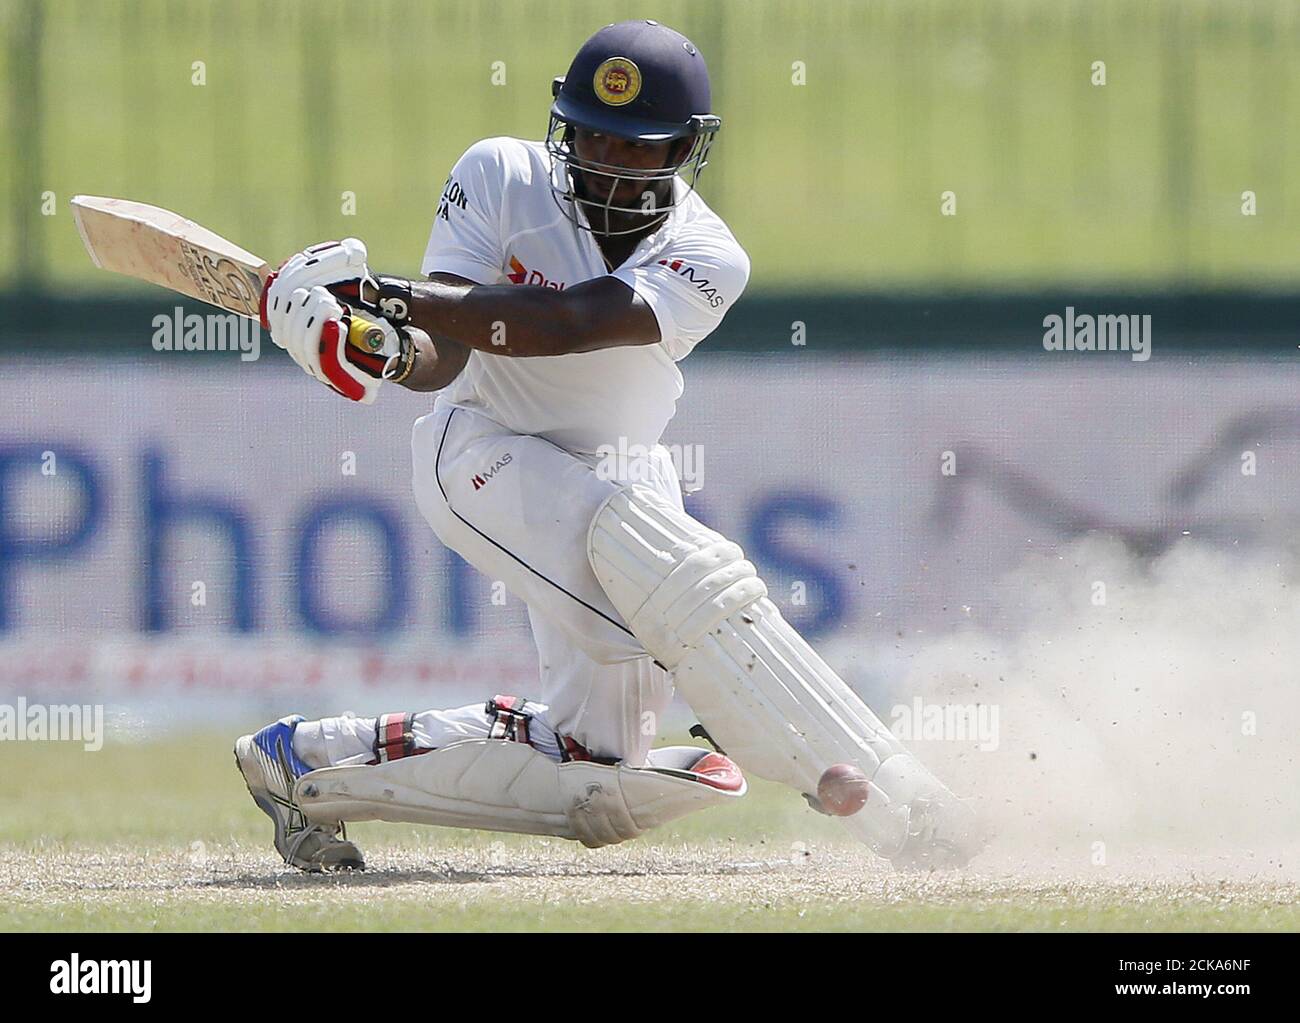 Sri Lanka's Kusal Perera plays a shot during the final day of their third and final test cricket match against India in Colombo, September 1, 2015. REUTERS/Dinuka Liyanawatte Stock Photo